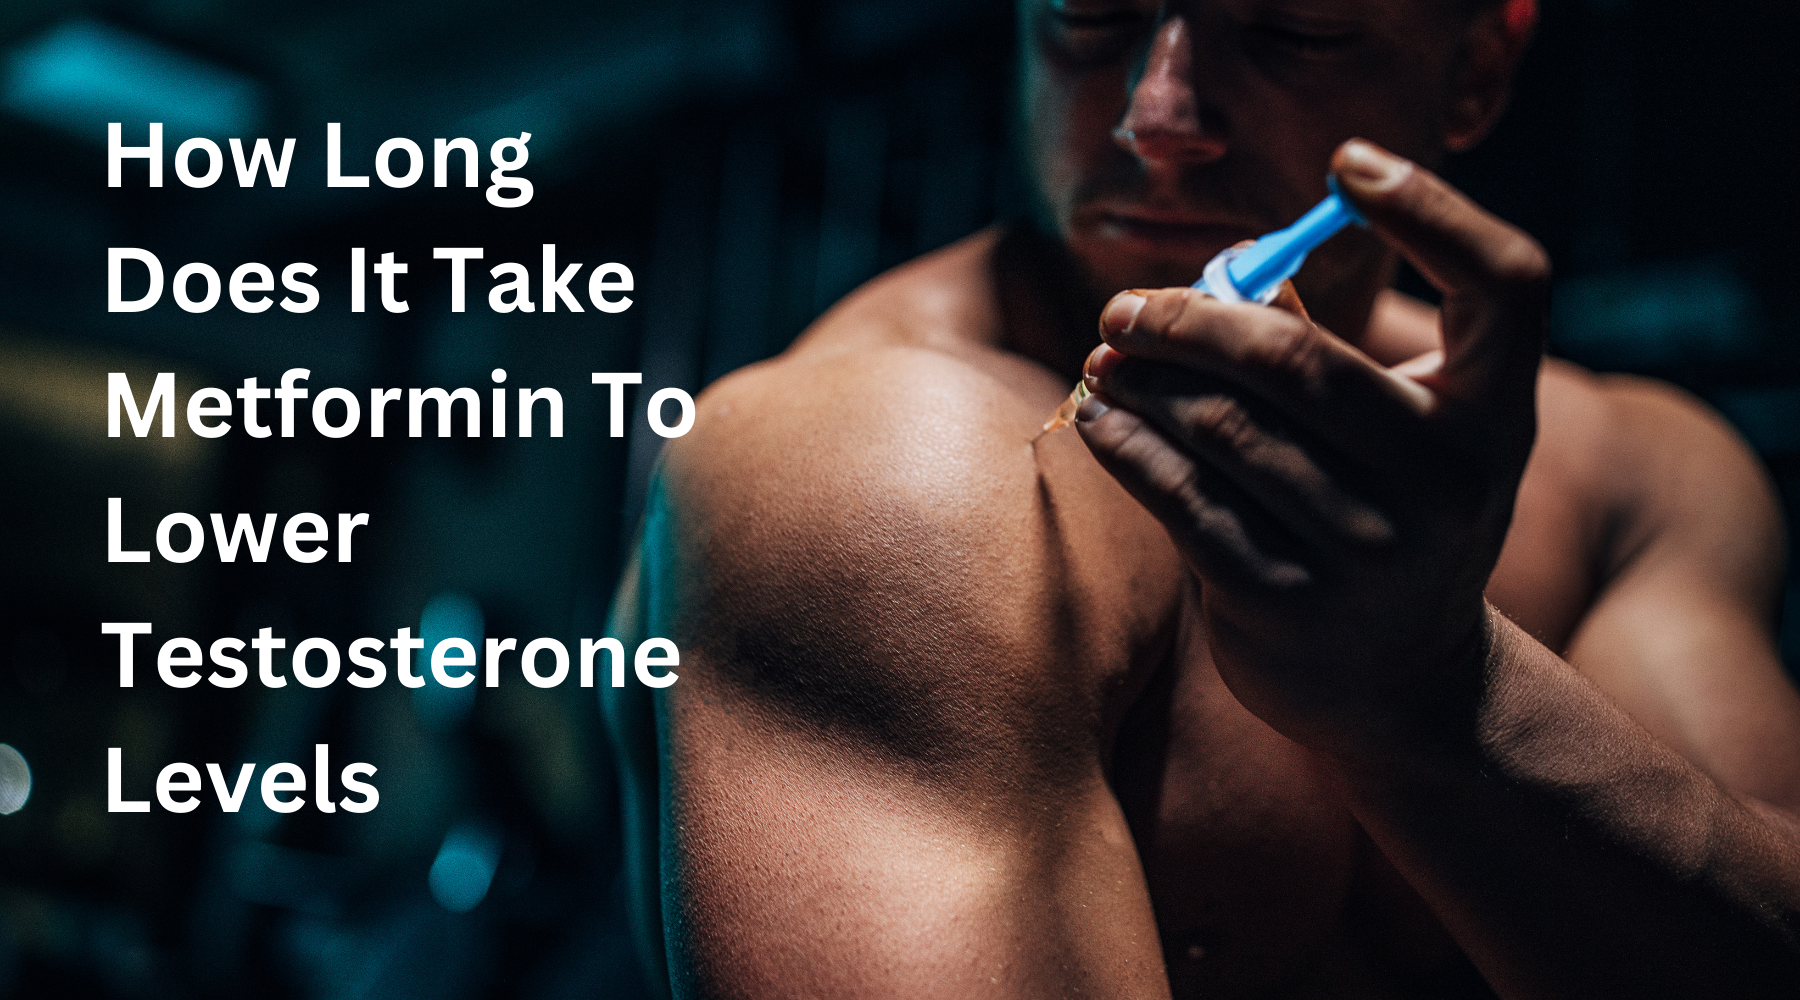 How Long Does It Take Metformin To Lower Testosterone Levels